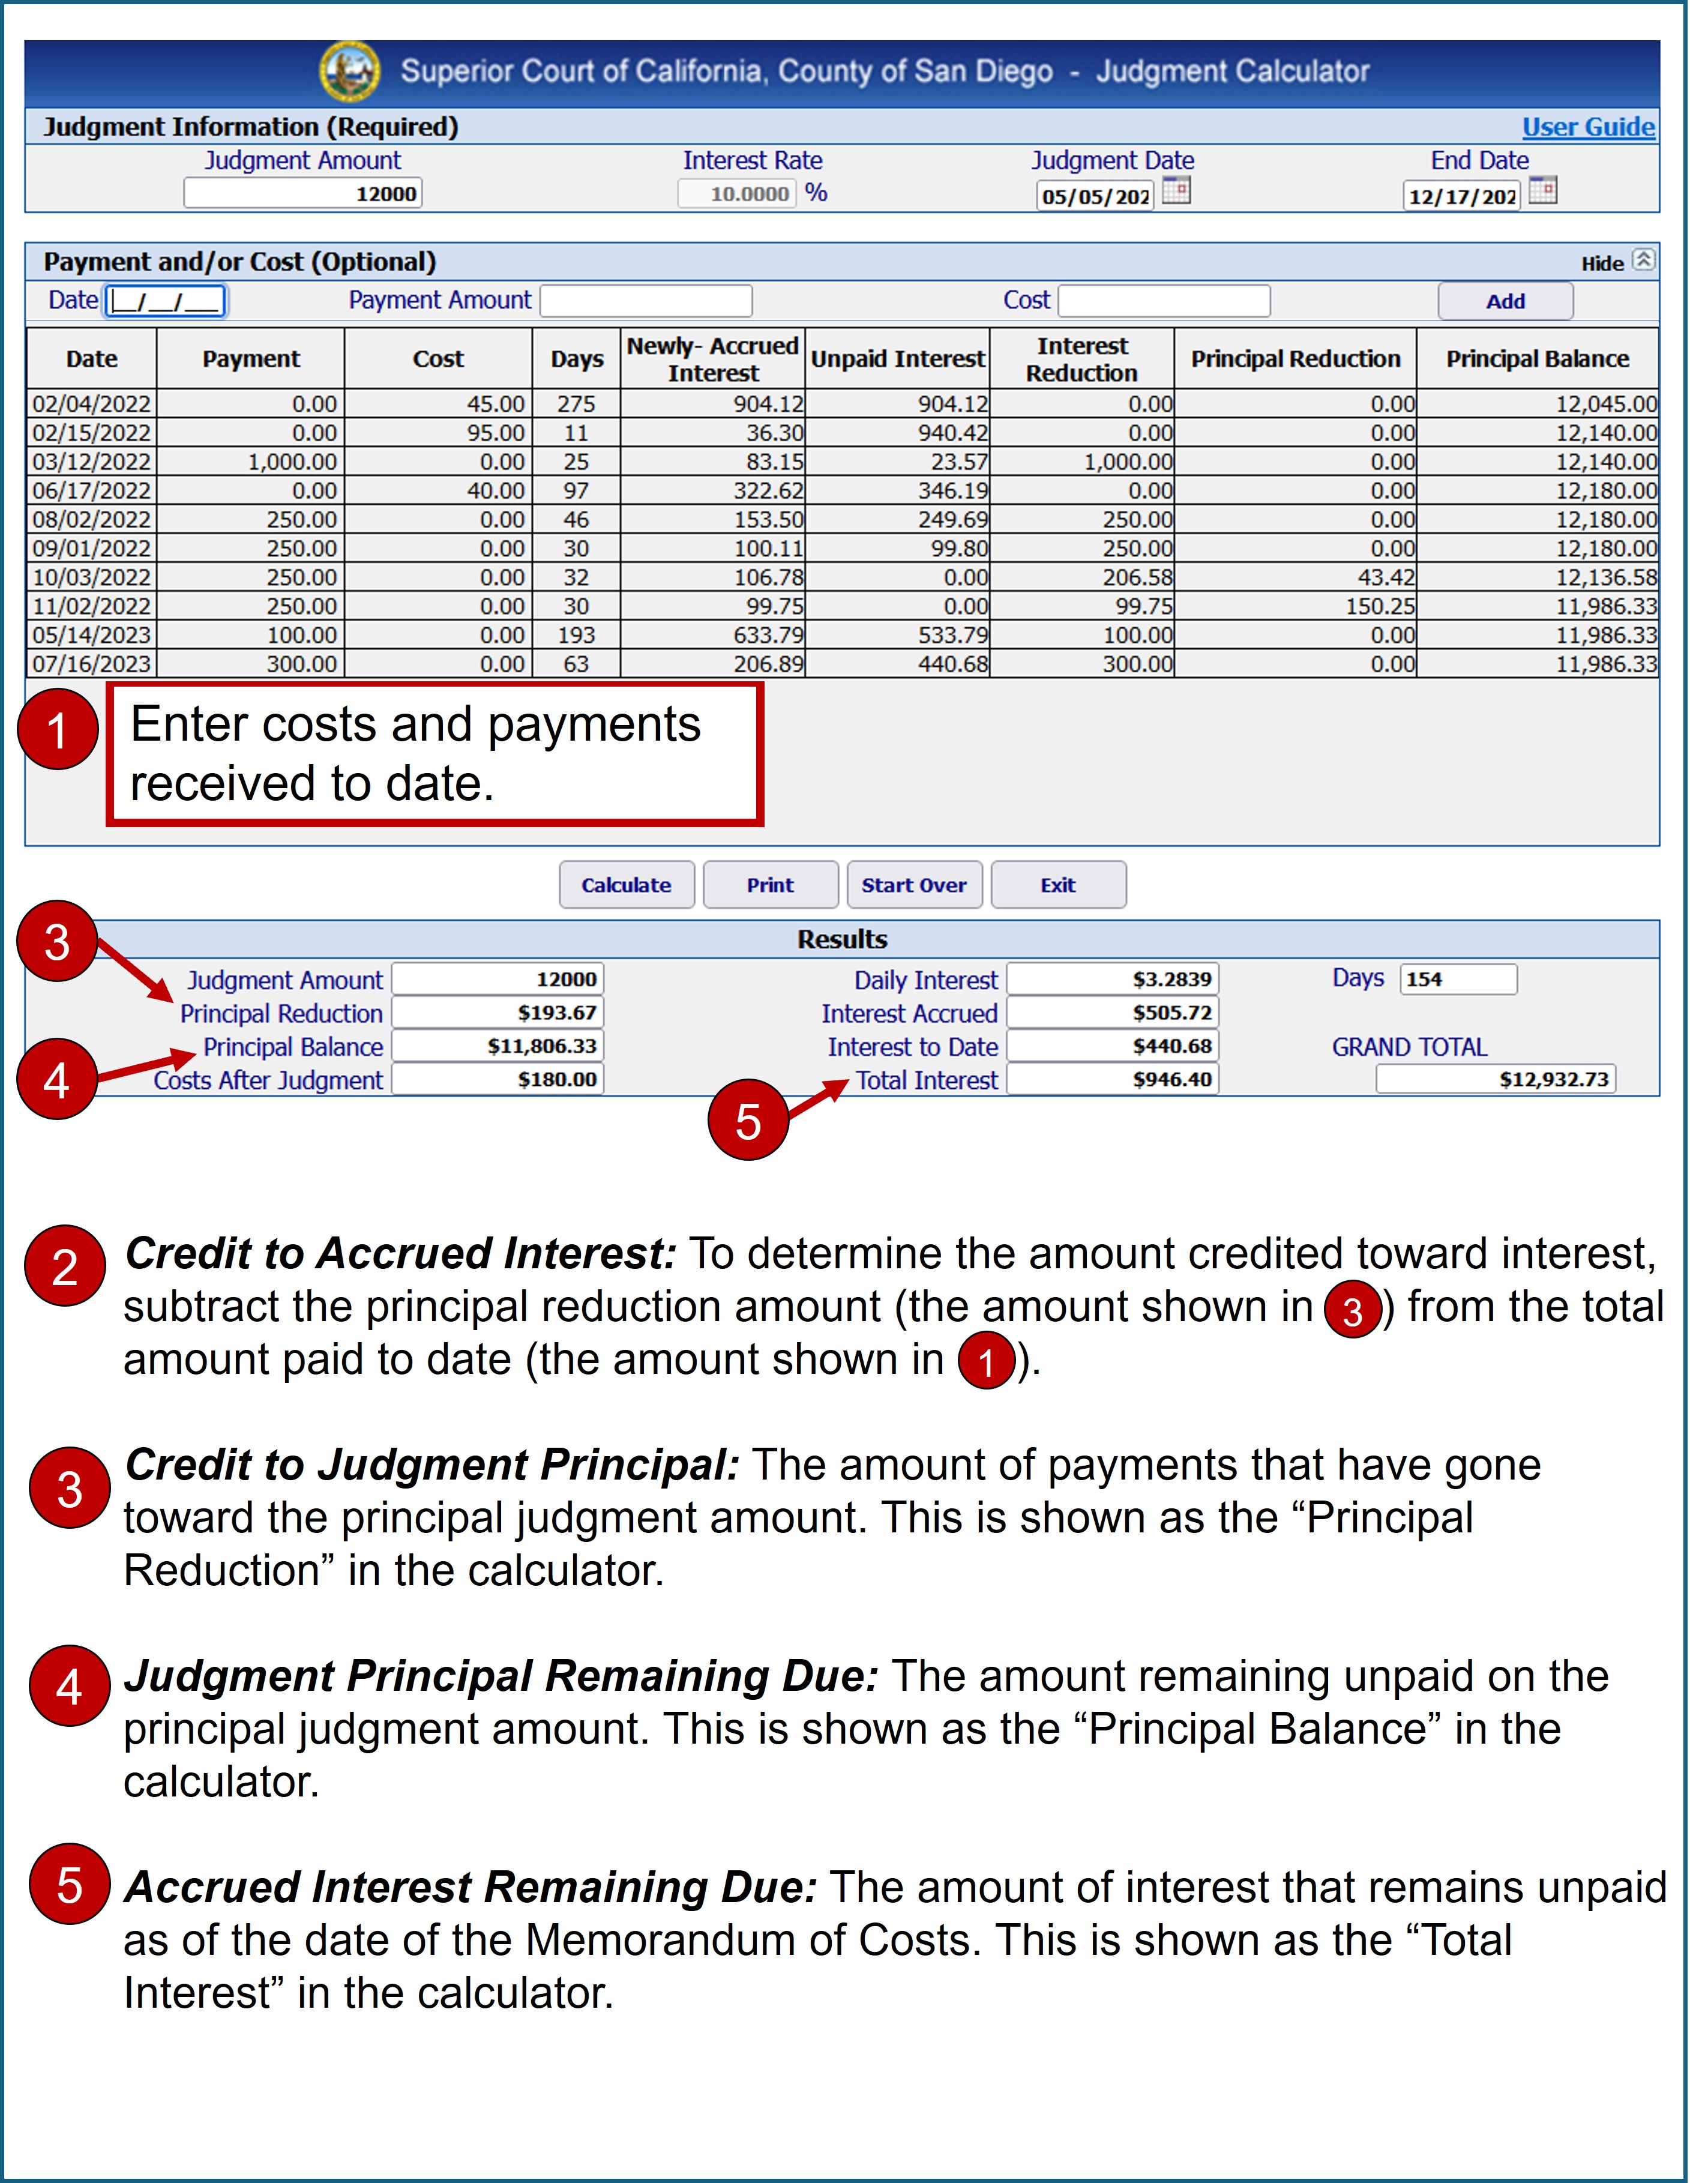 Image of the San Diego Judgment Calculator, with text explaining how to match the various entries to the information requested in the Memorandum of Costs.  
1. Enter costs and payments received to date.  
2. Credit to Accrued Interest: To determine the amount credited toward interest, subtract the principal reduction amount (the amount shown in  3) from the total amount paid to date (the amount shown in 1)
3. Credit to Judgment Principal: The amount of payments that have gone toward the principal judgment amount. This is shown as the “Principal Reduction” in the calculator.
4. Judgment Principal Remaining Due: The amount remaining unpaid on the principal judgment amount. This is shown as the “Principal Balance” in the calculator. 
5. Accrued Interest Remaining Due: The amount of interest that remains unpaid as of the date of the Memorandum of Costs. This is shown as the “Total Interest” in the calculator.
